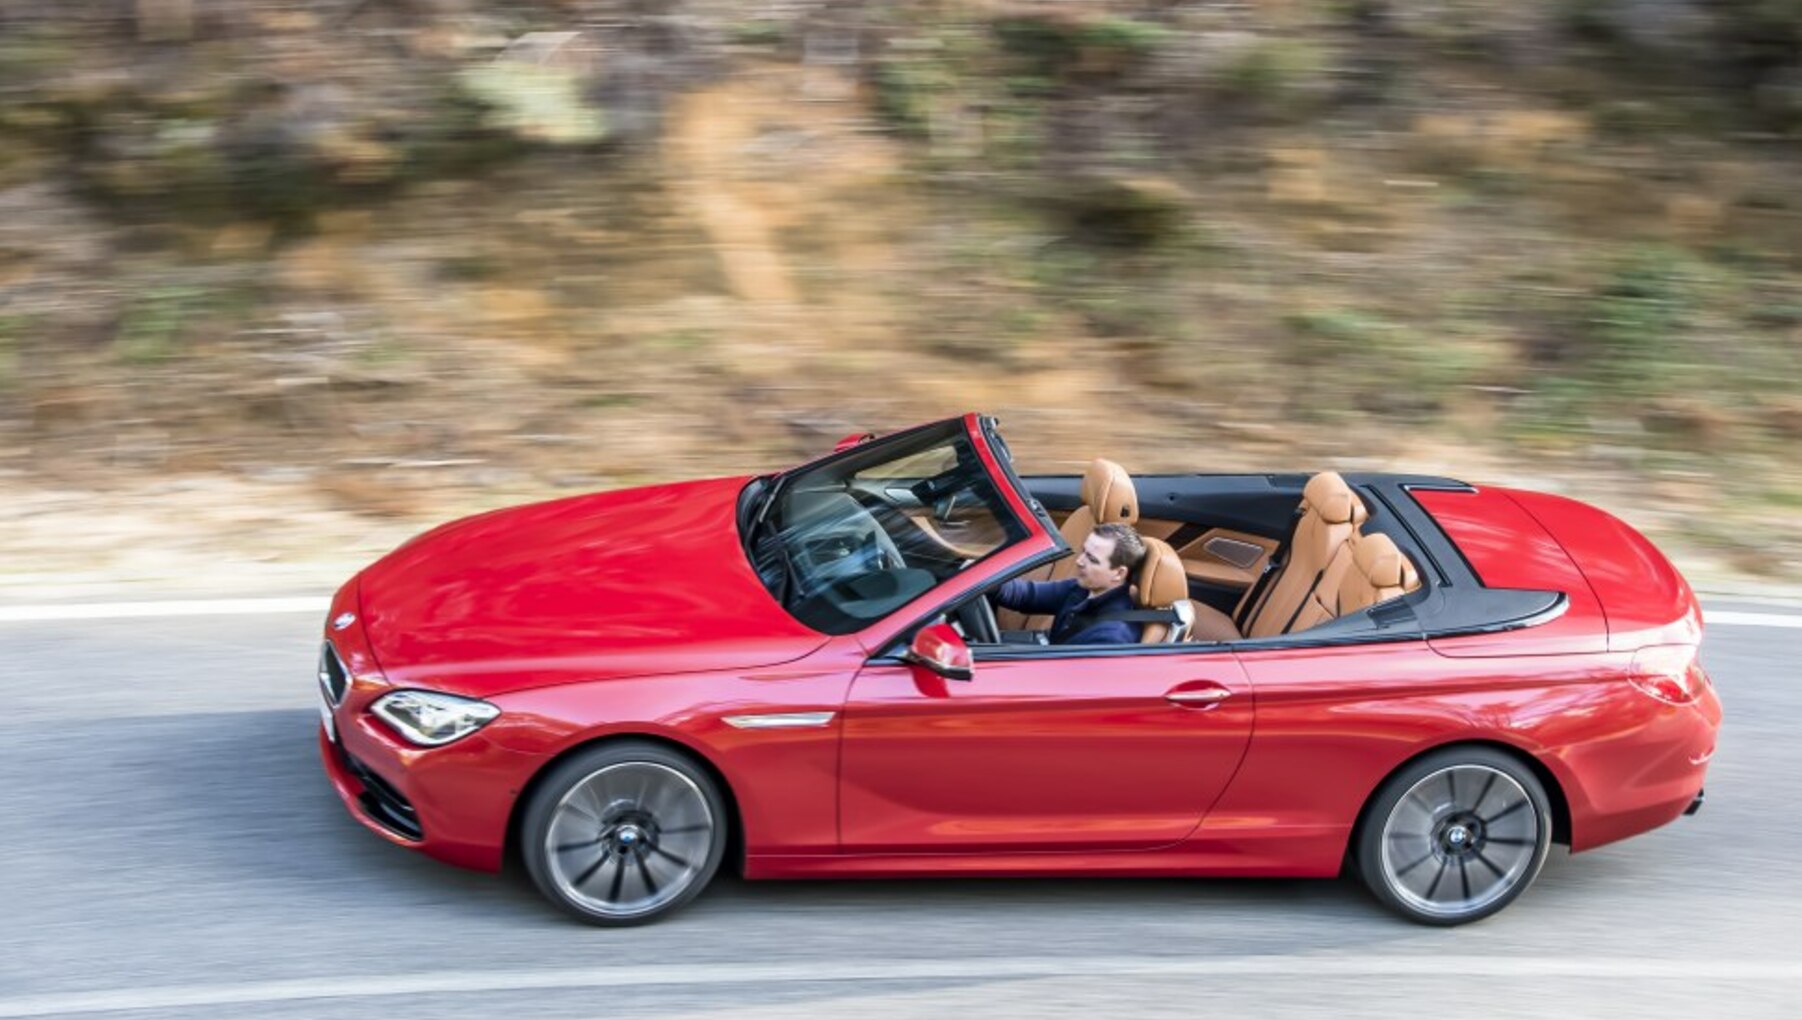 BMW M6 Convertible (F12M, LCI, facelift 2014) Competition 4.4 V8 (600 Hp) M DCT 2015, 2016, 2017, 2018 